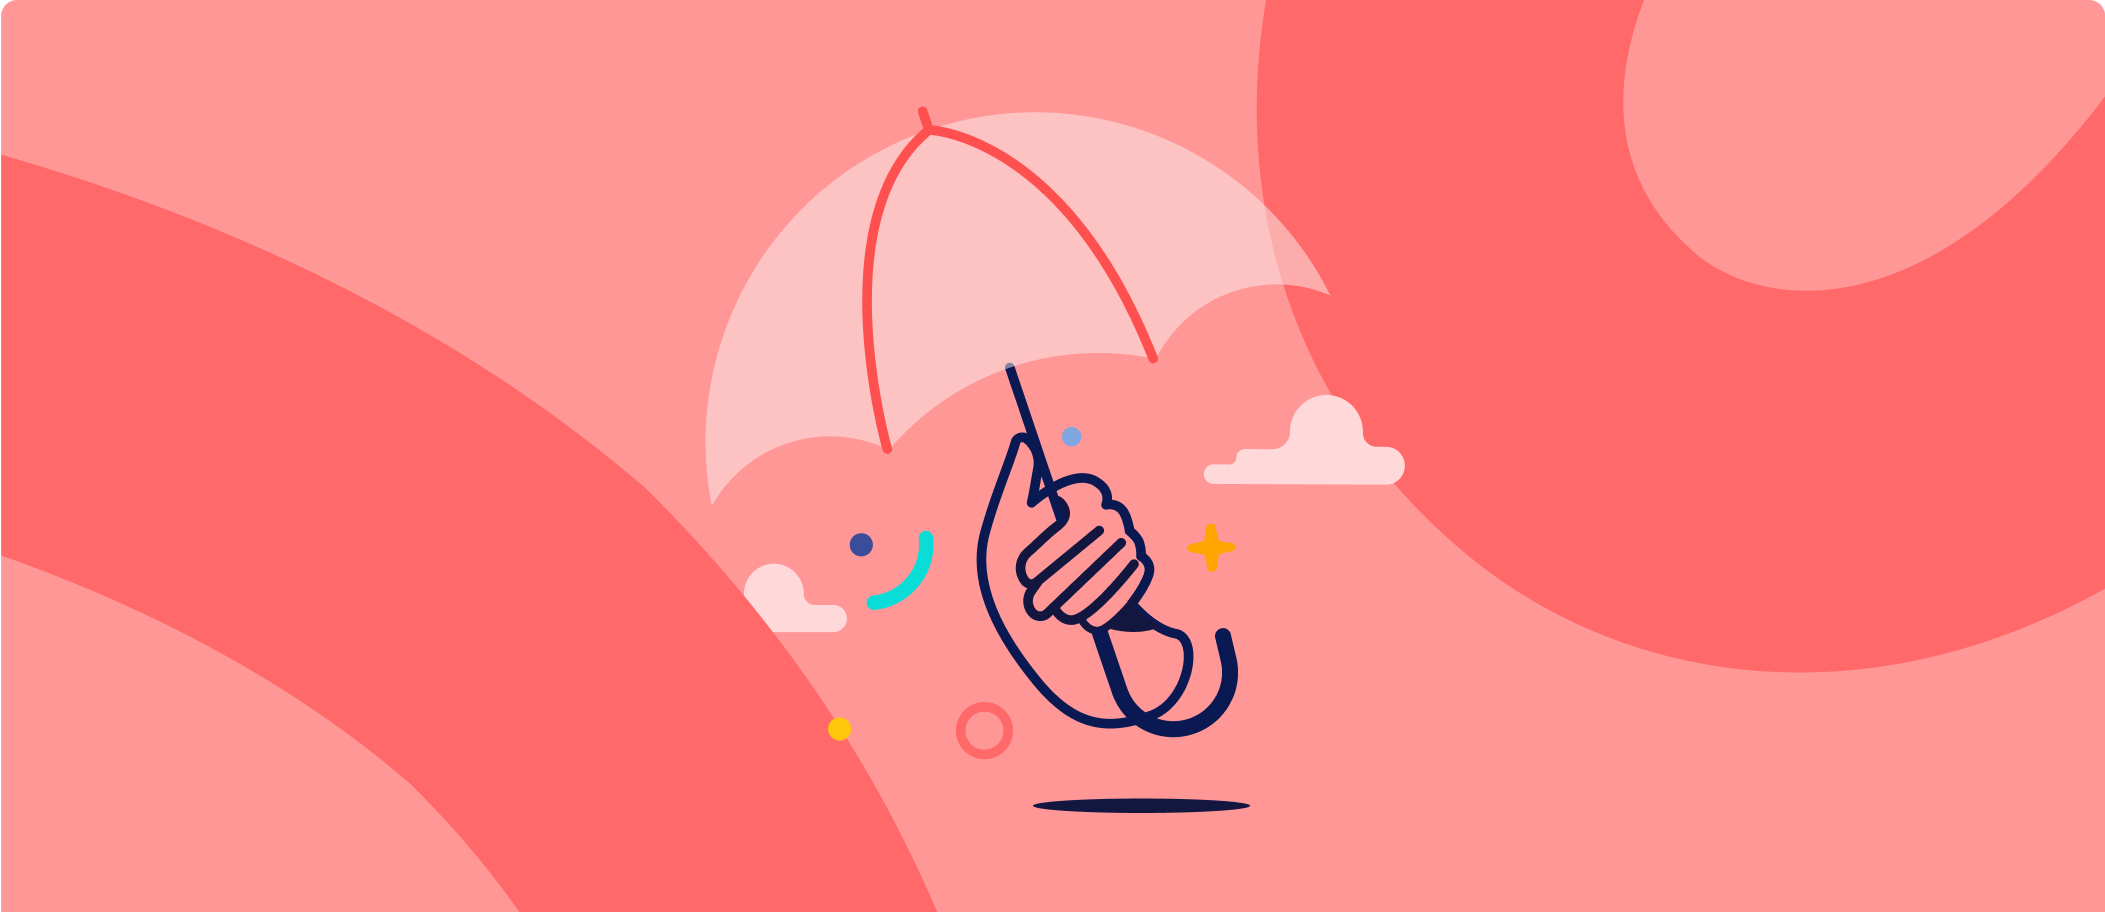 Image of hand holding an umbrella